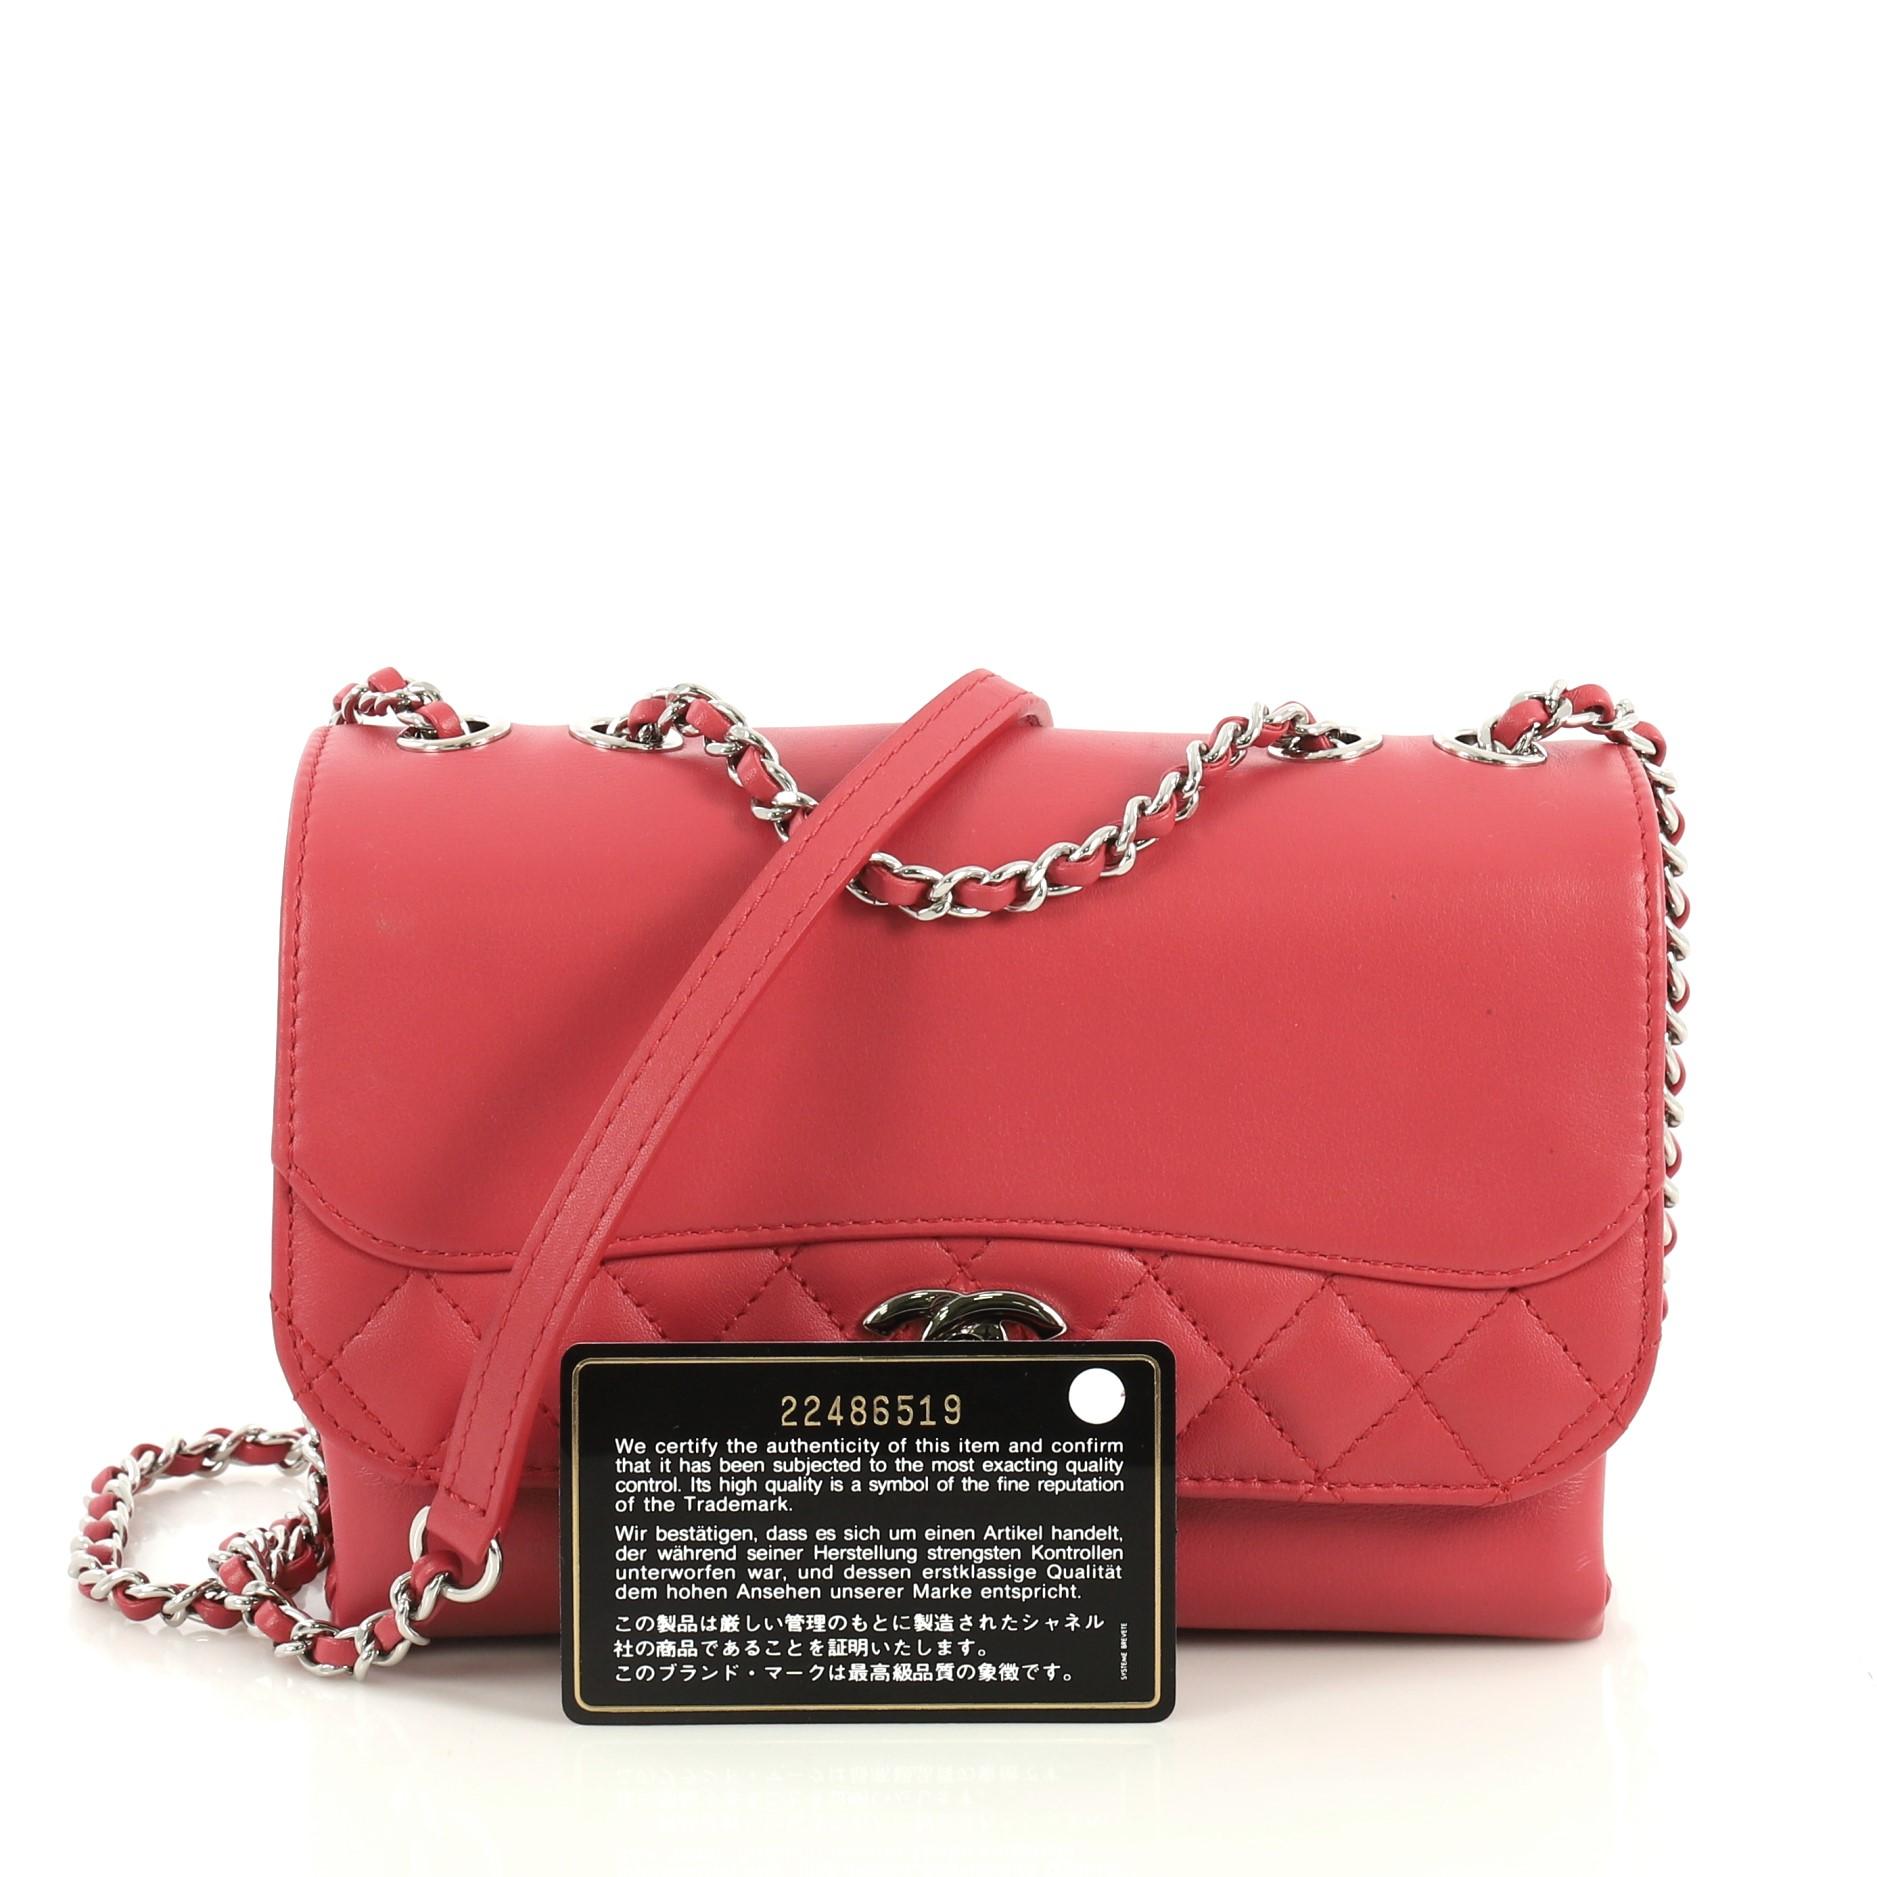 This Chanel Tramezzo Flap Bag Calfskin Small, crafted in red calfskin leather, features woven in leather chain link straps with leather pads, exterior back slip pocket and silver-tone hardware. Its CC turn-lock closure opens to a red fabric interior